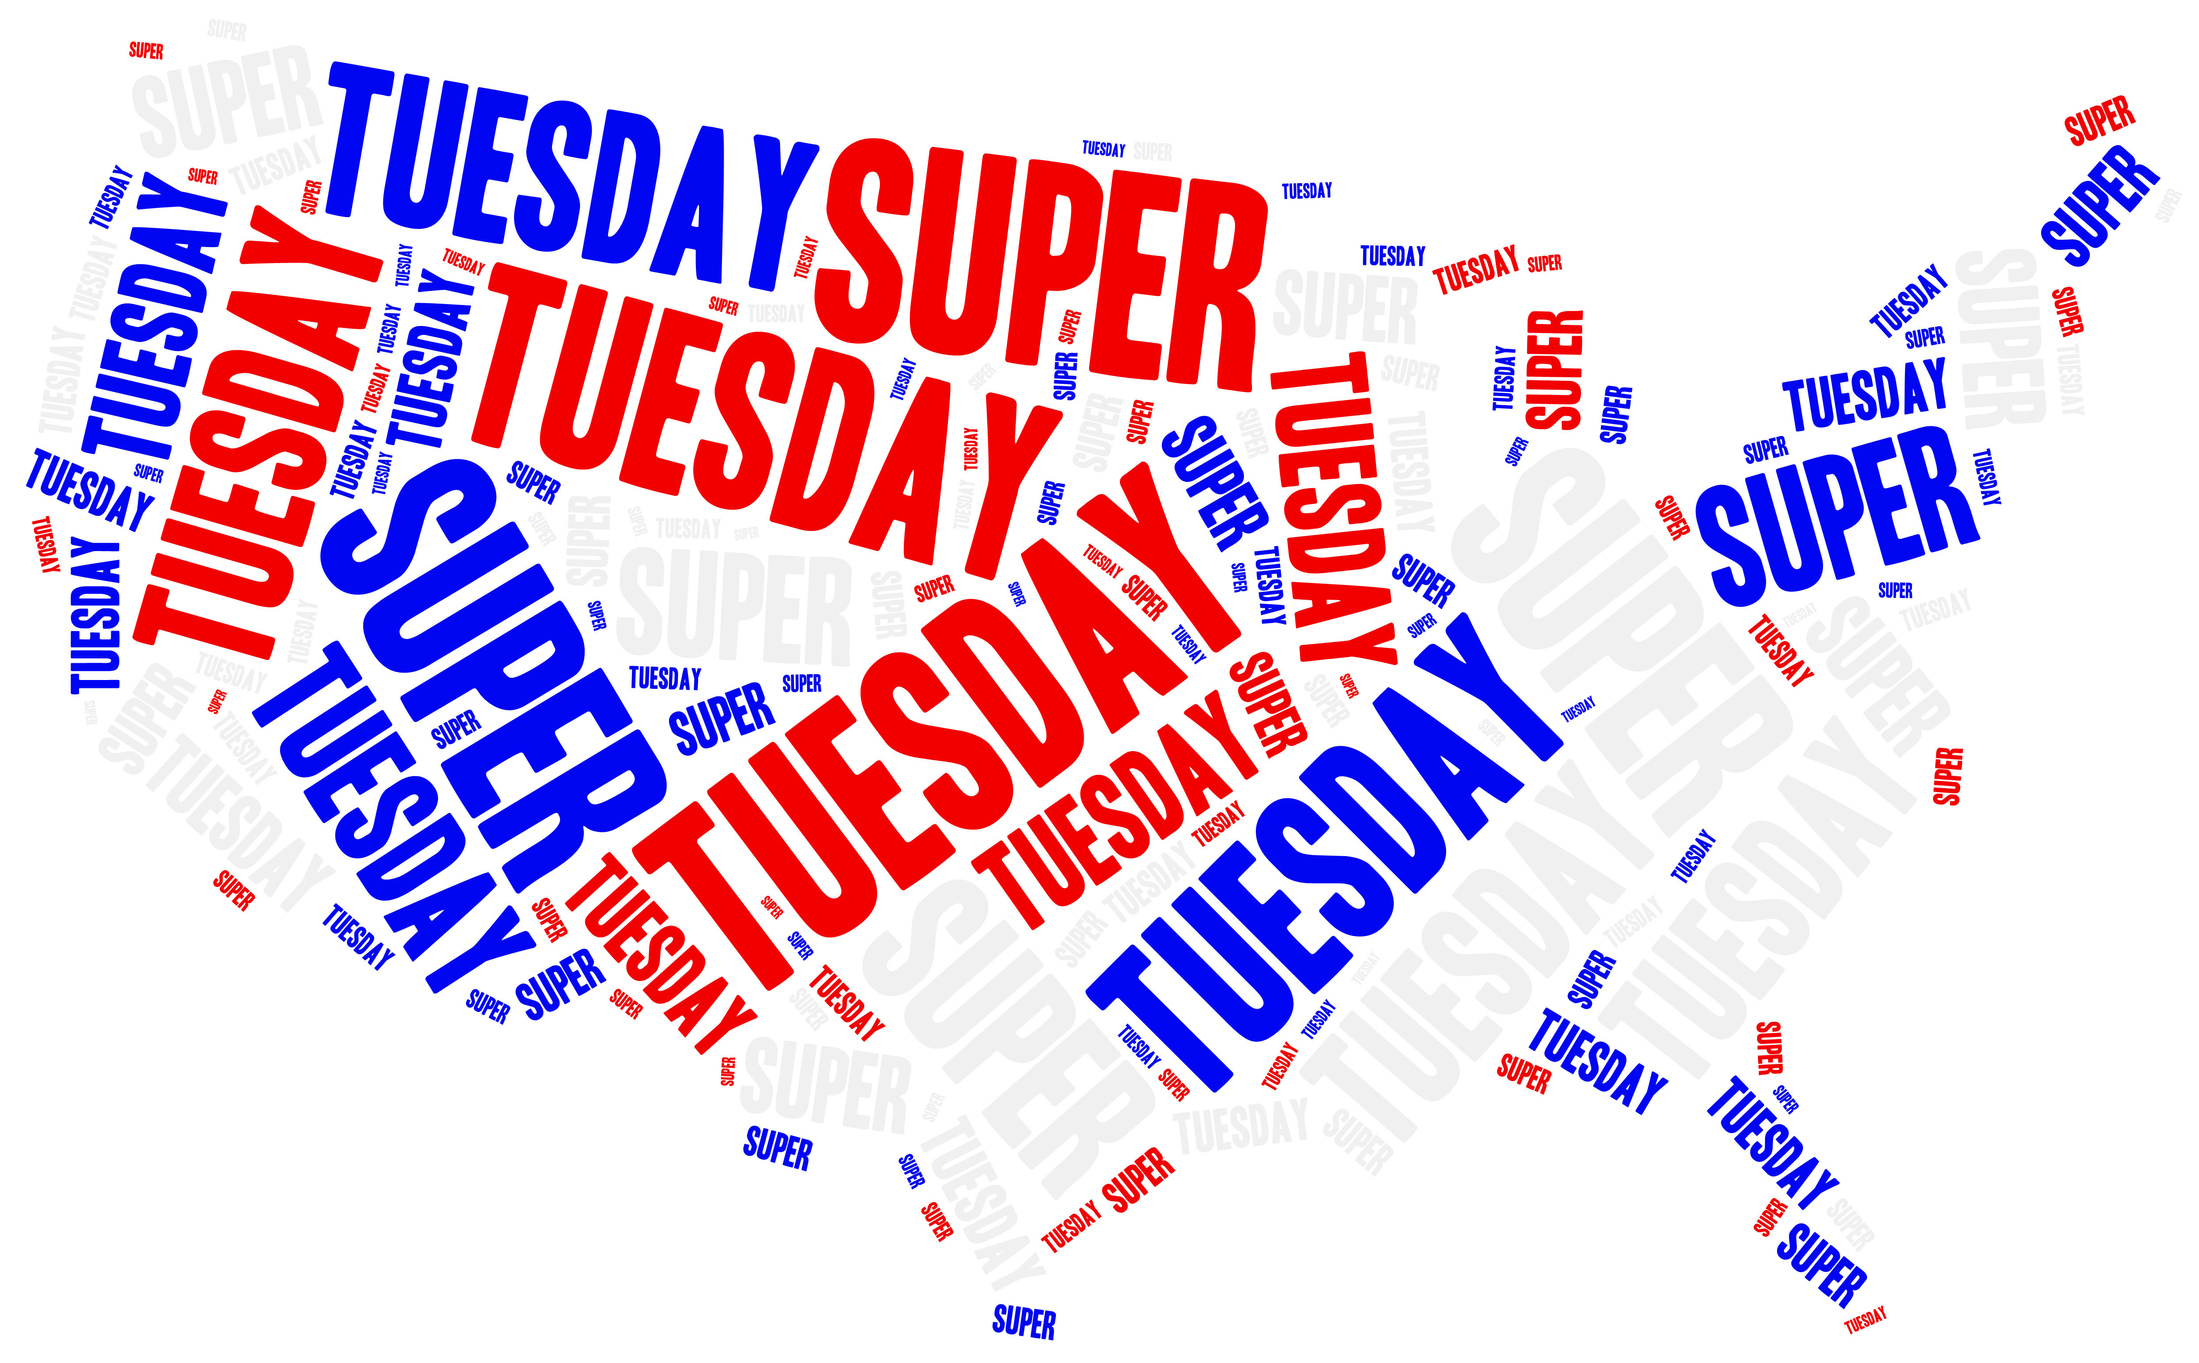 super tuesday election 2020